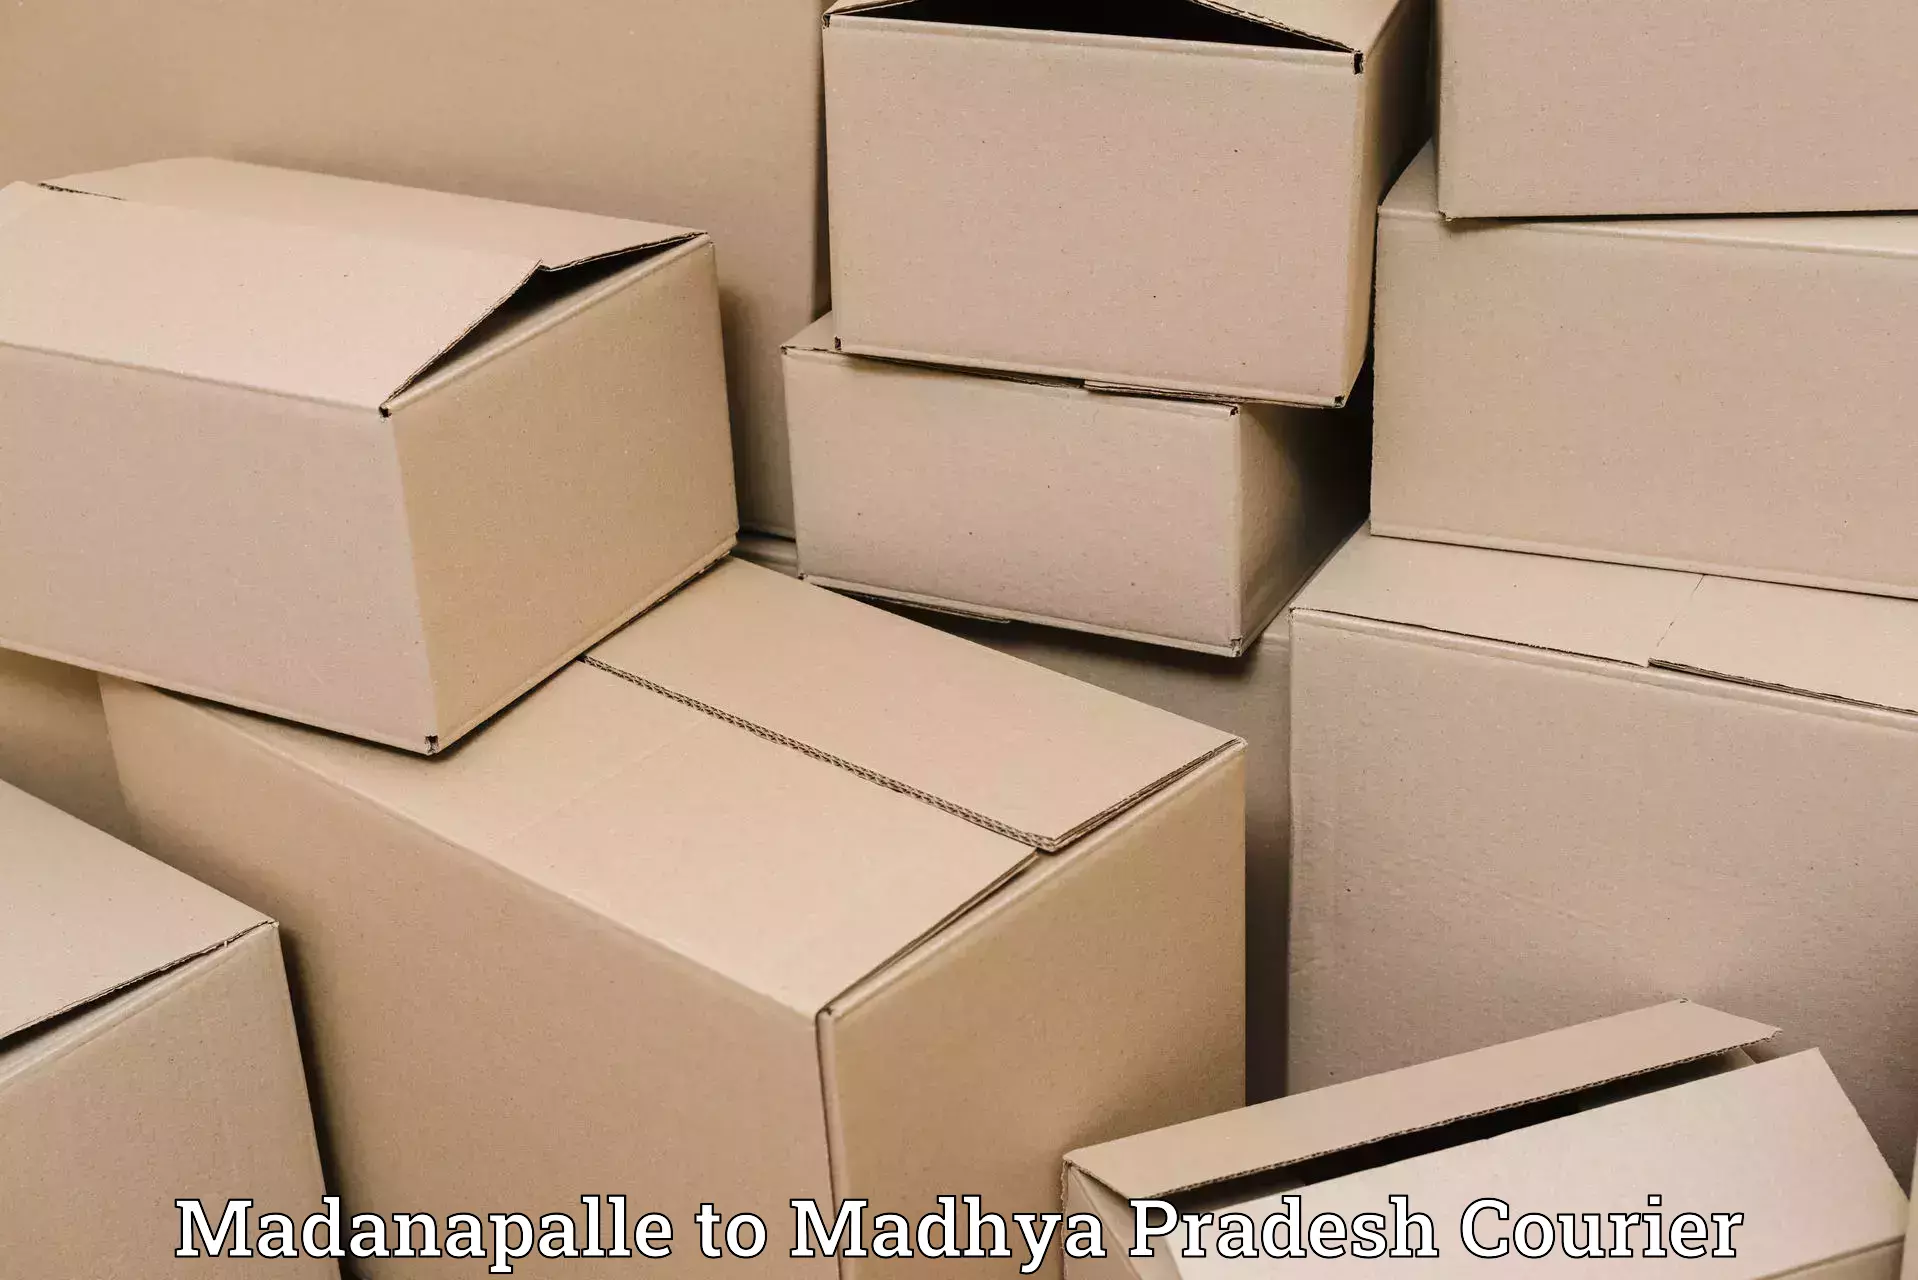 Efficient courier operations in Madanapalle to Nagod